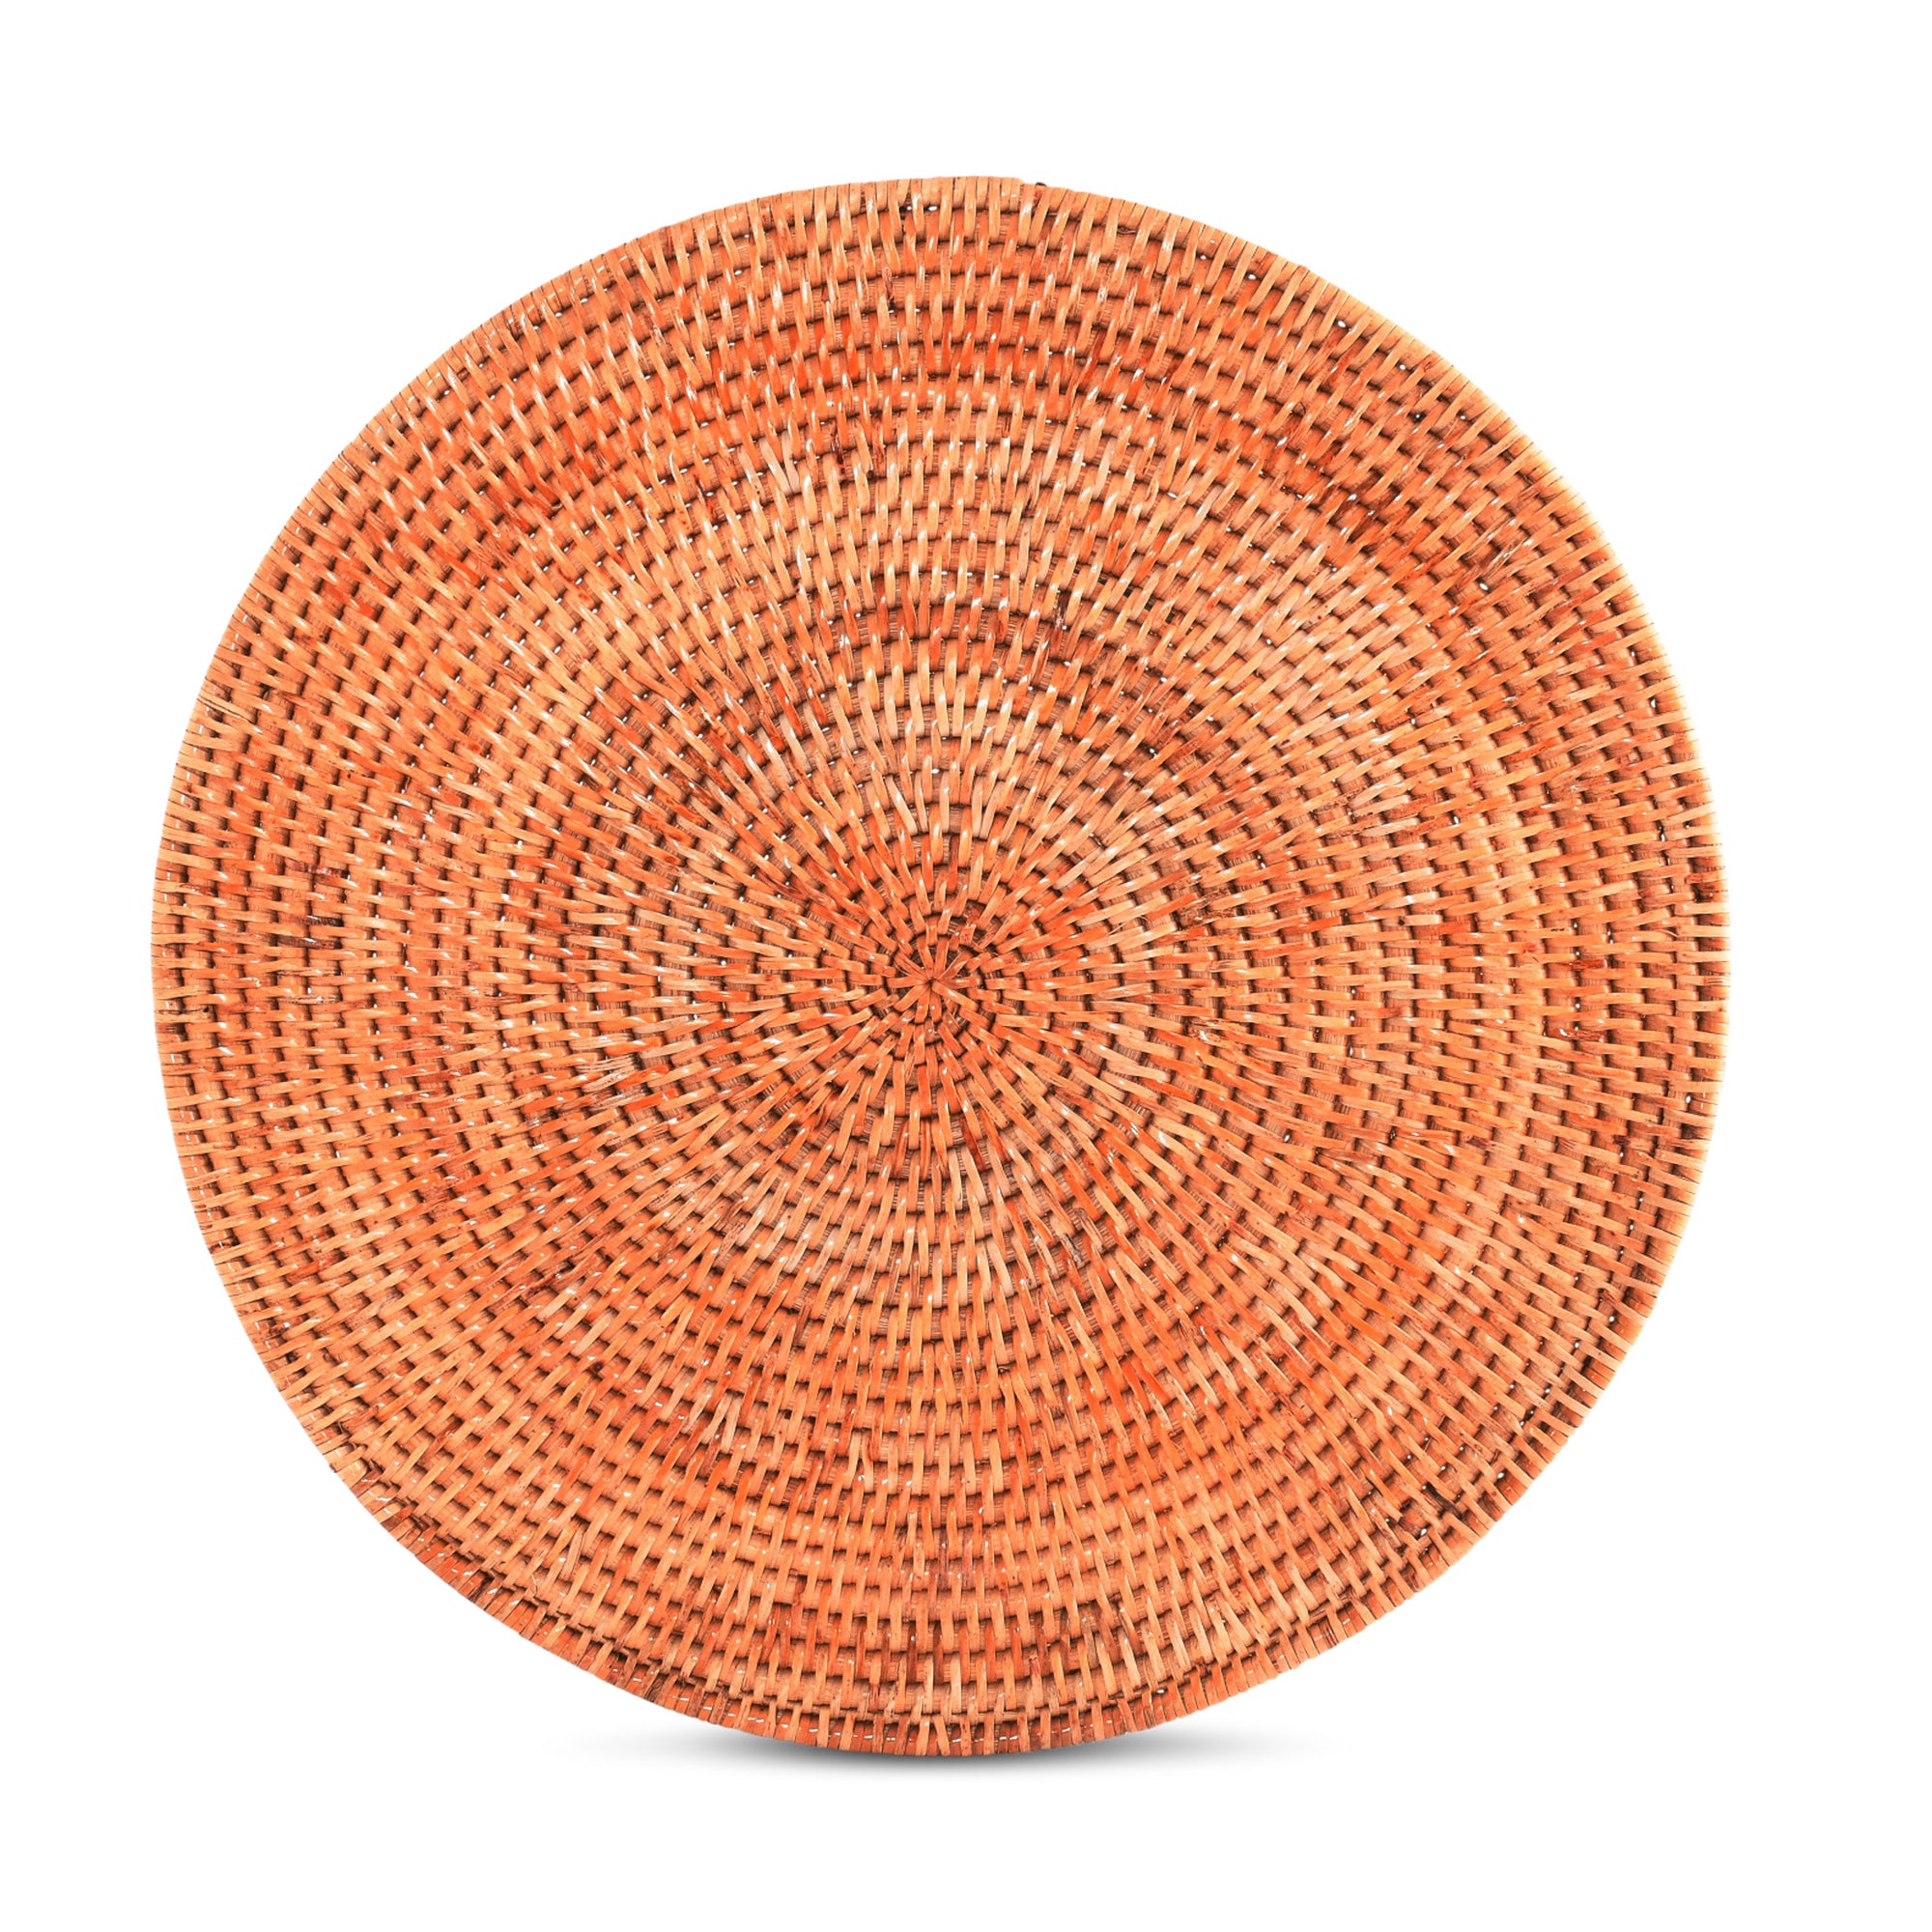 Vagabond House Hand Woven Wicker Rattan Round Placemat - Set of 4 Product Image